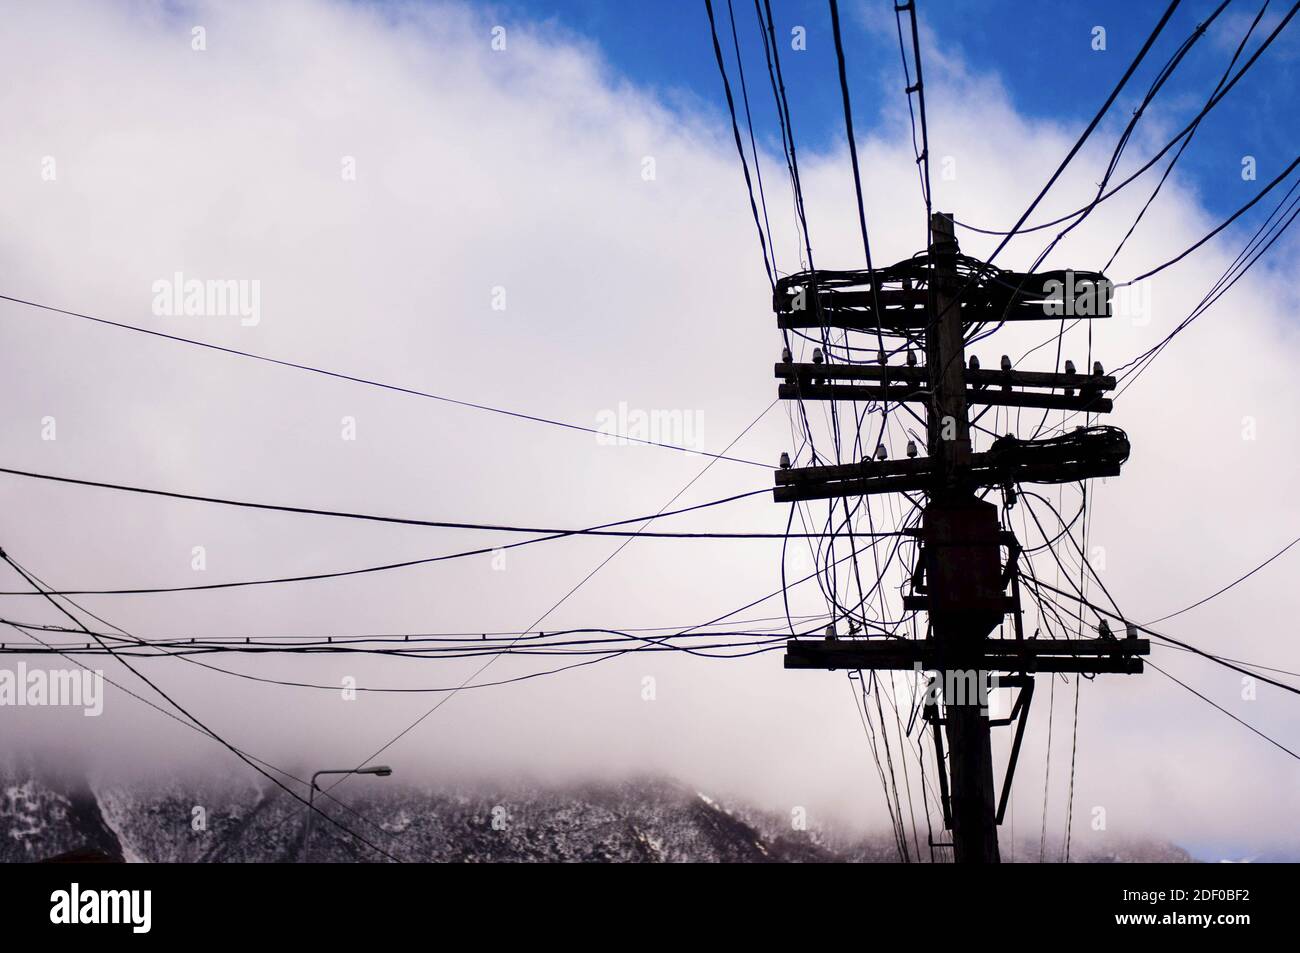 Complicated arrangement with messy electric wiring, white clouds in the background creating contrast Stock Photo